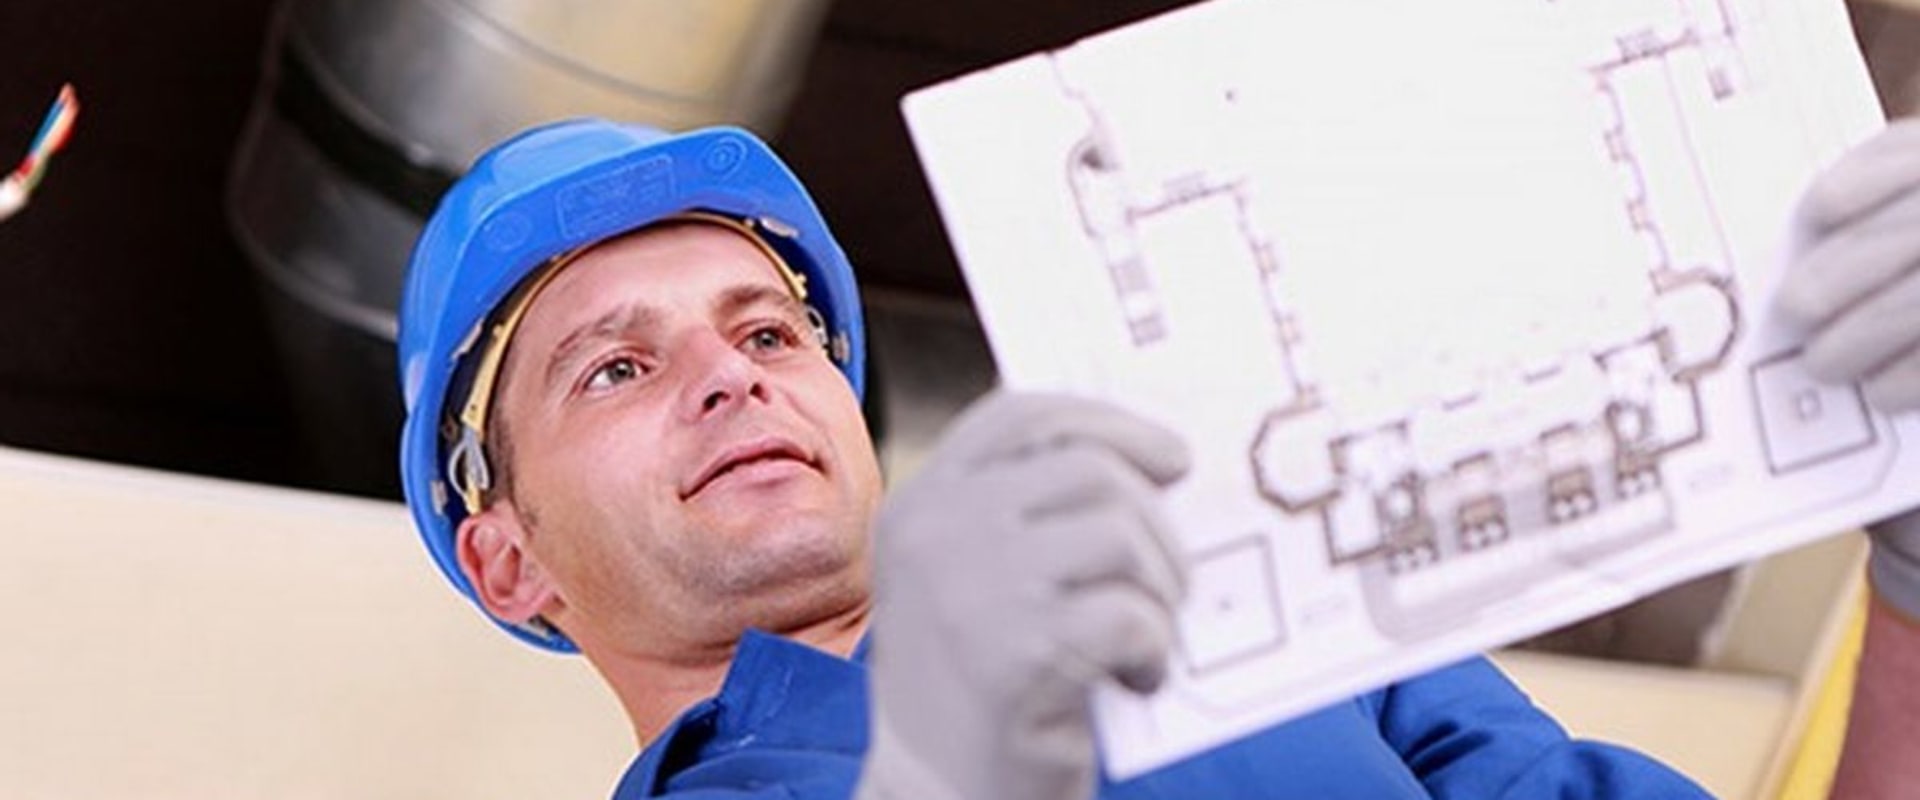 Boiler Replacement In Stoke-on-Trent: Why Should You Hire A Boiler Specialist Than A Furnace Repair Company?